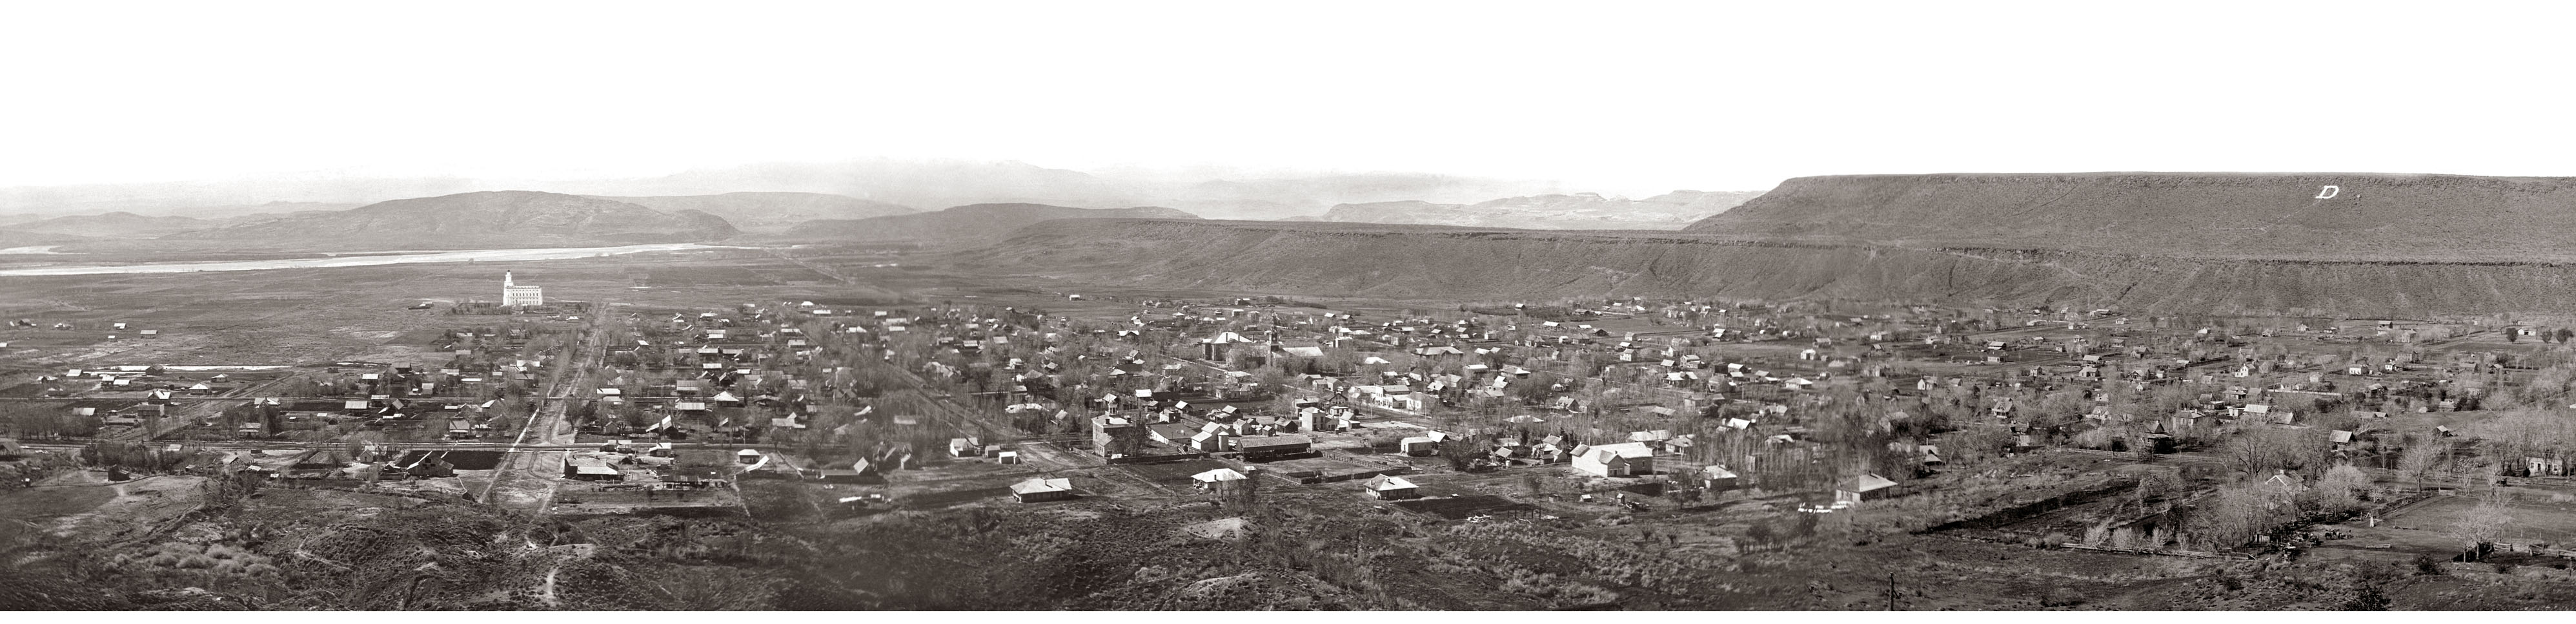 Panoramic view of St. George